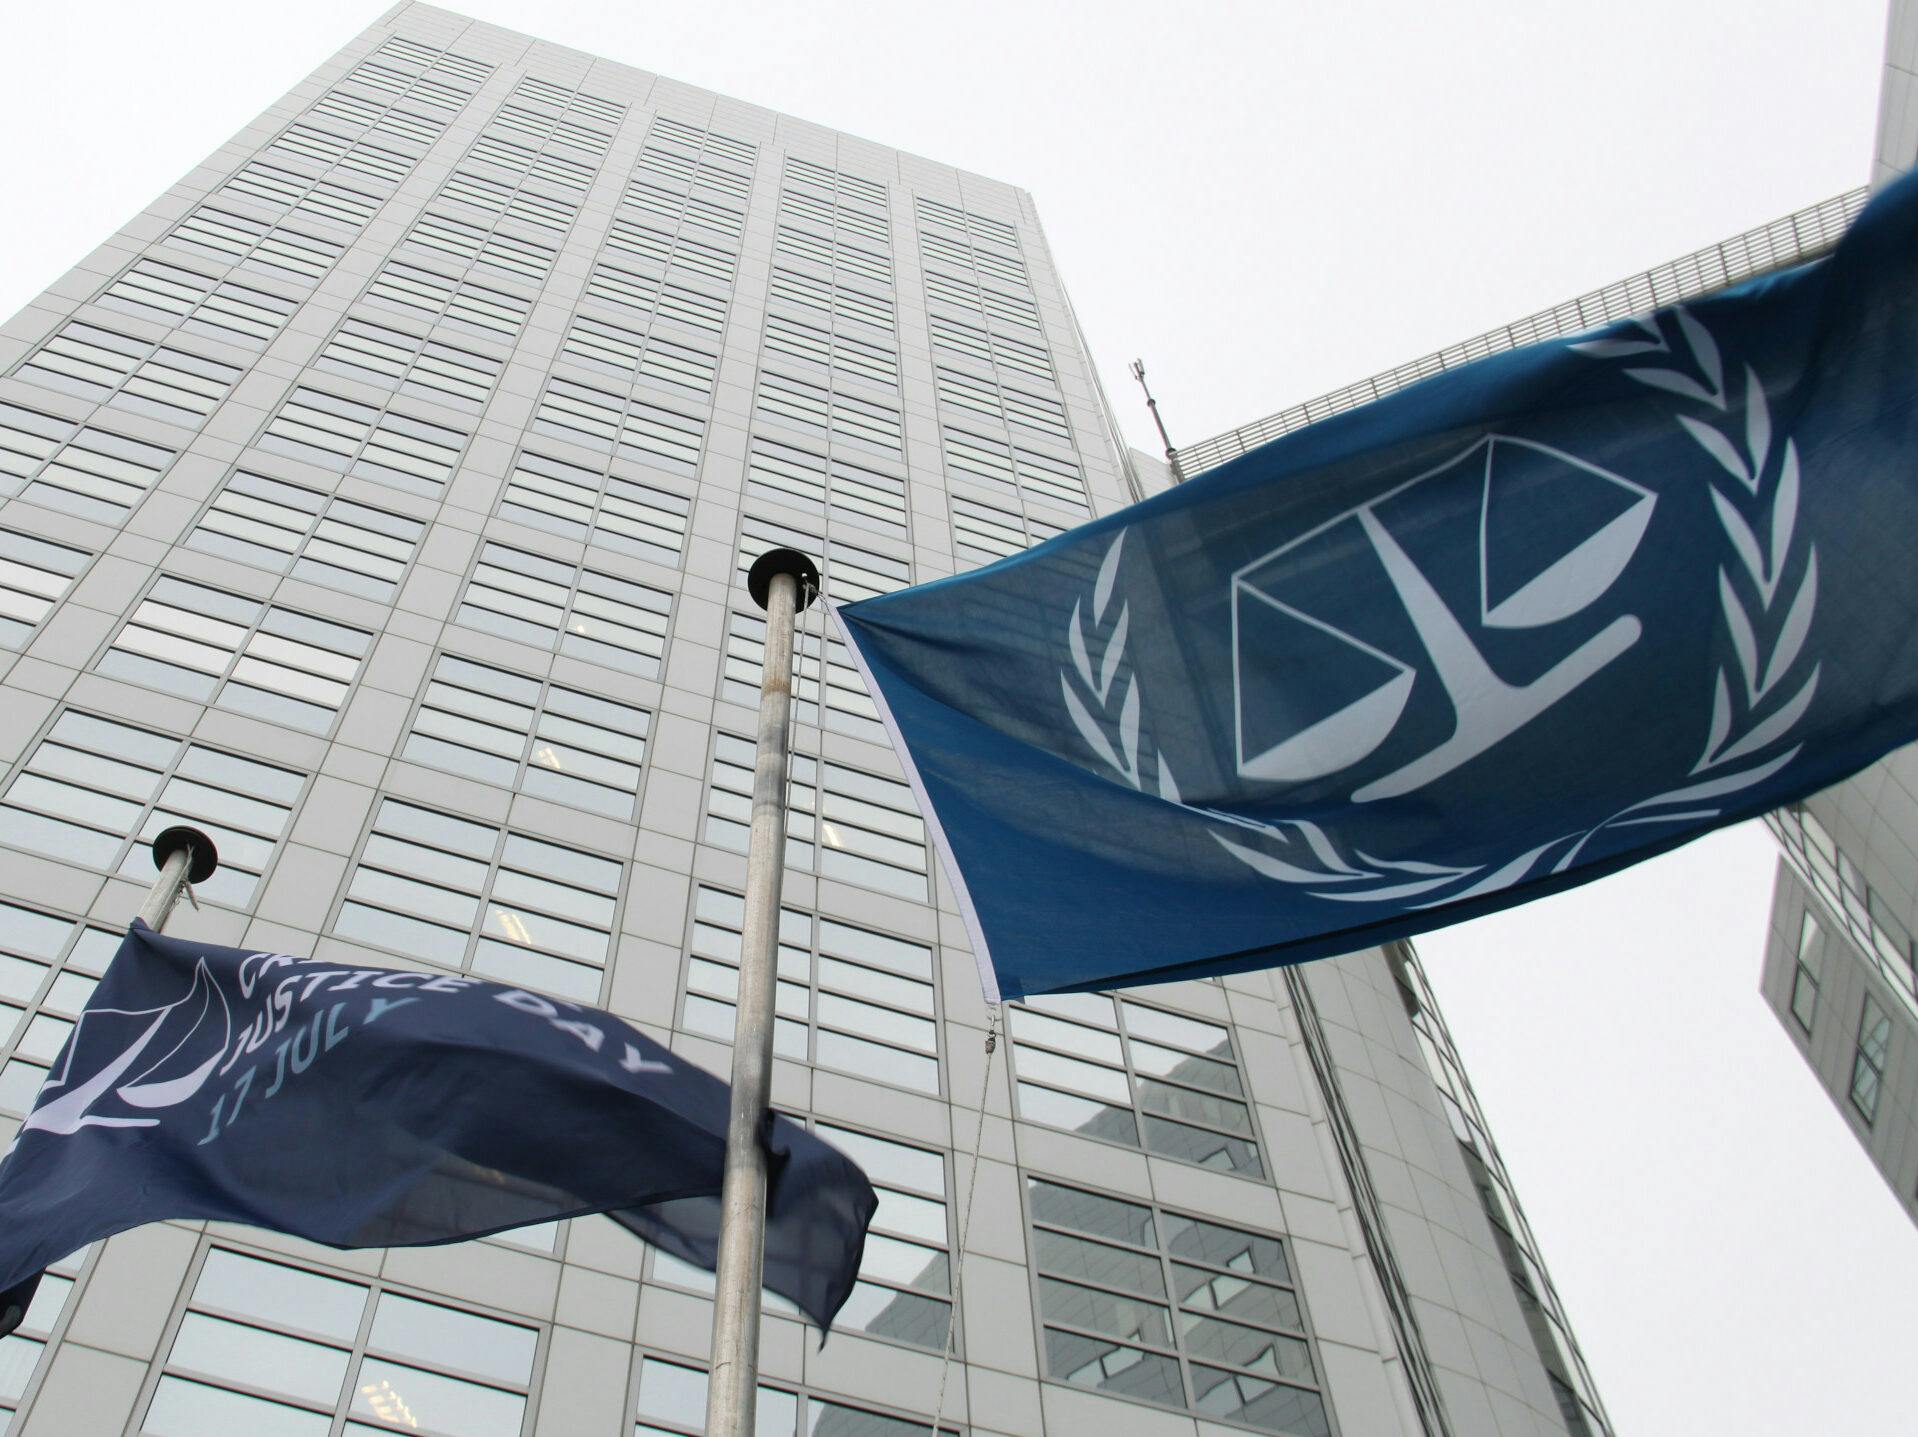 Blue flags of the International Criminal Court in front of the Court's office tower.